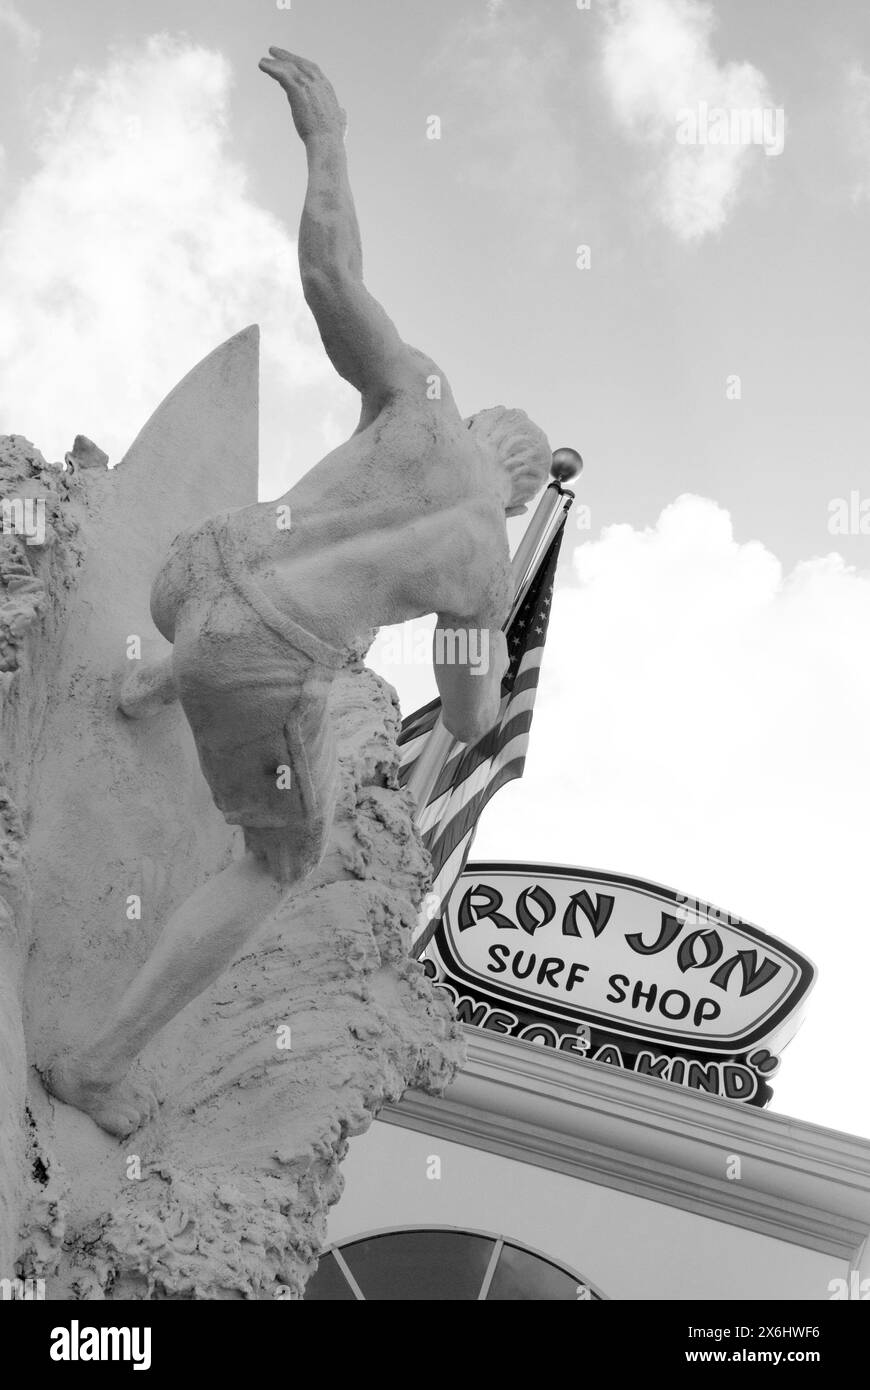 Ron Jon Surf Shop sign and surfer statue at Cocoa Beach, Florida, USA. Stock Photo